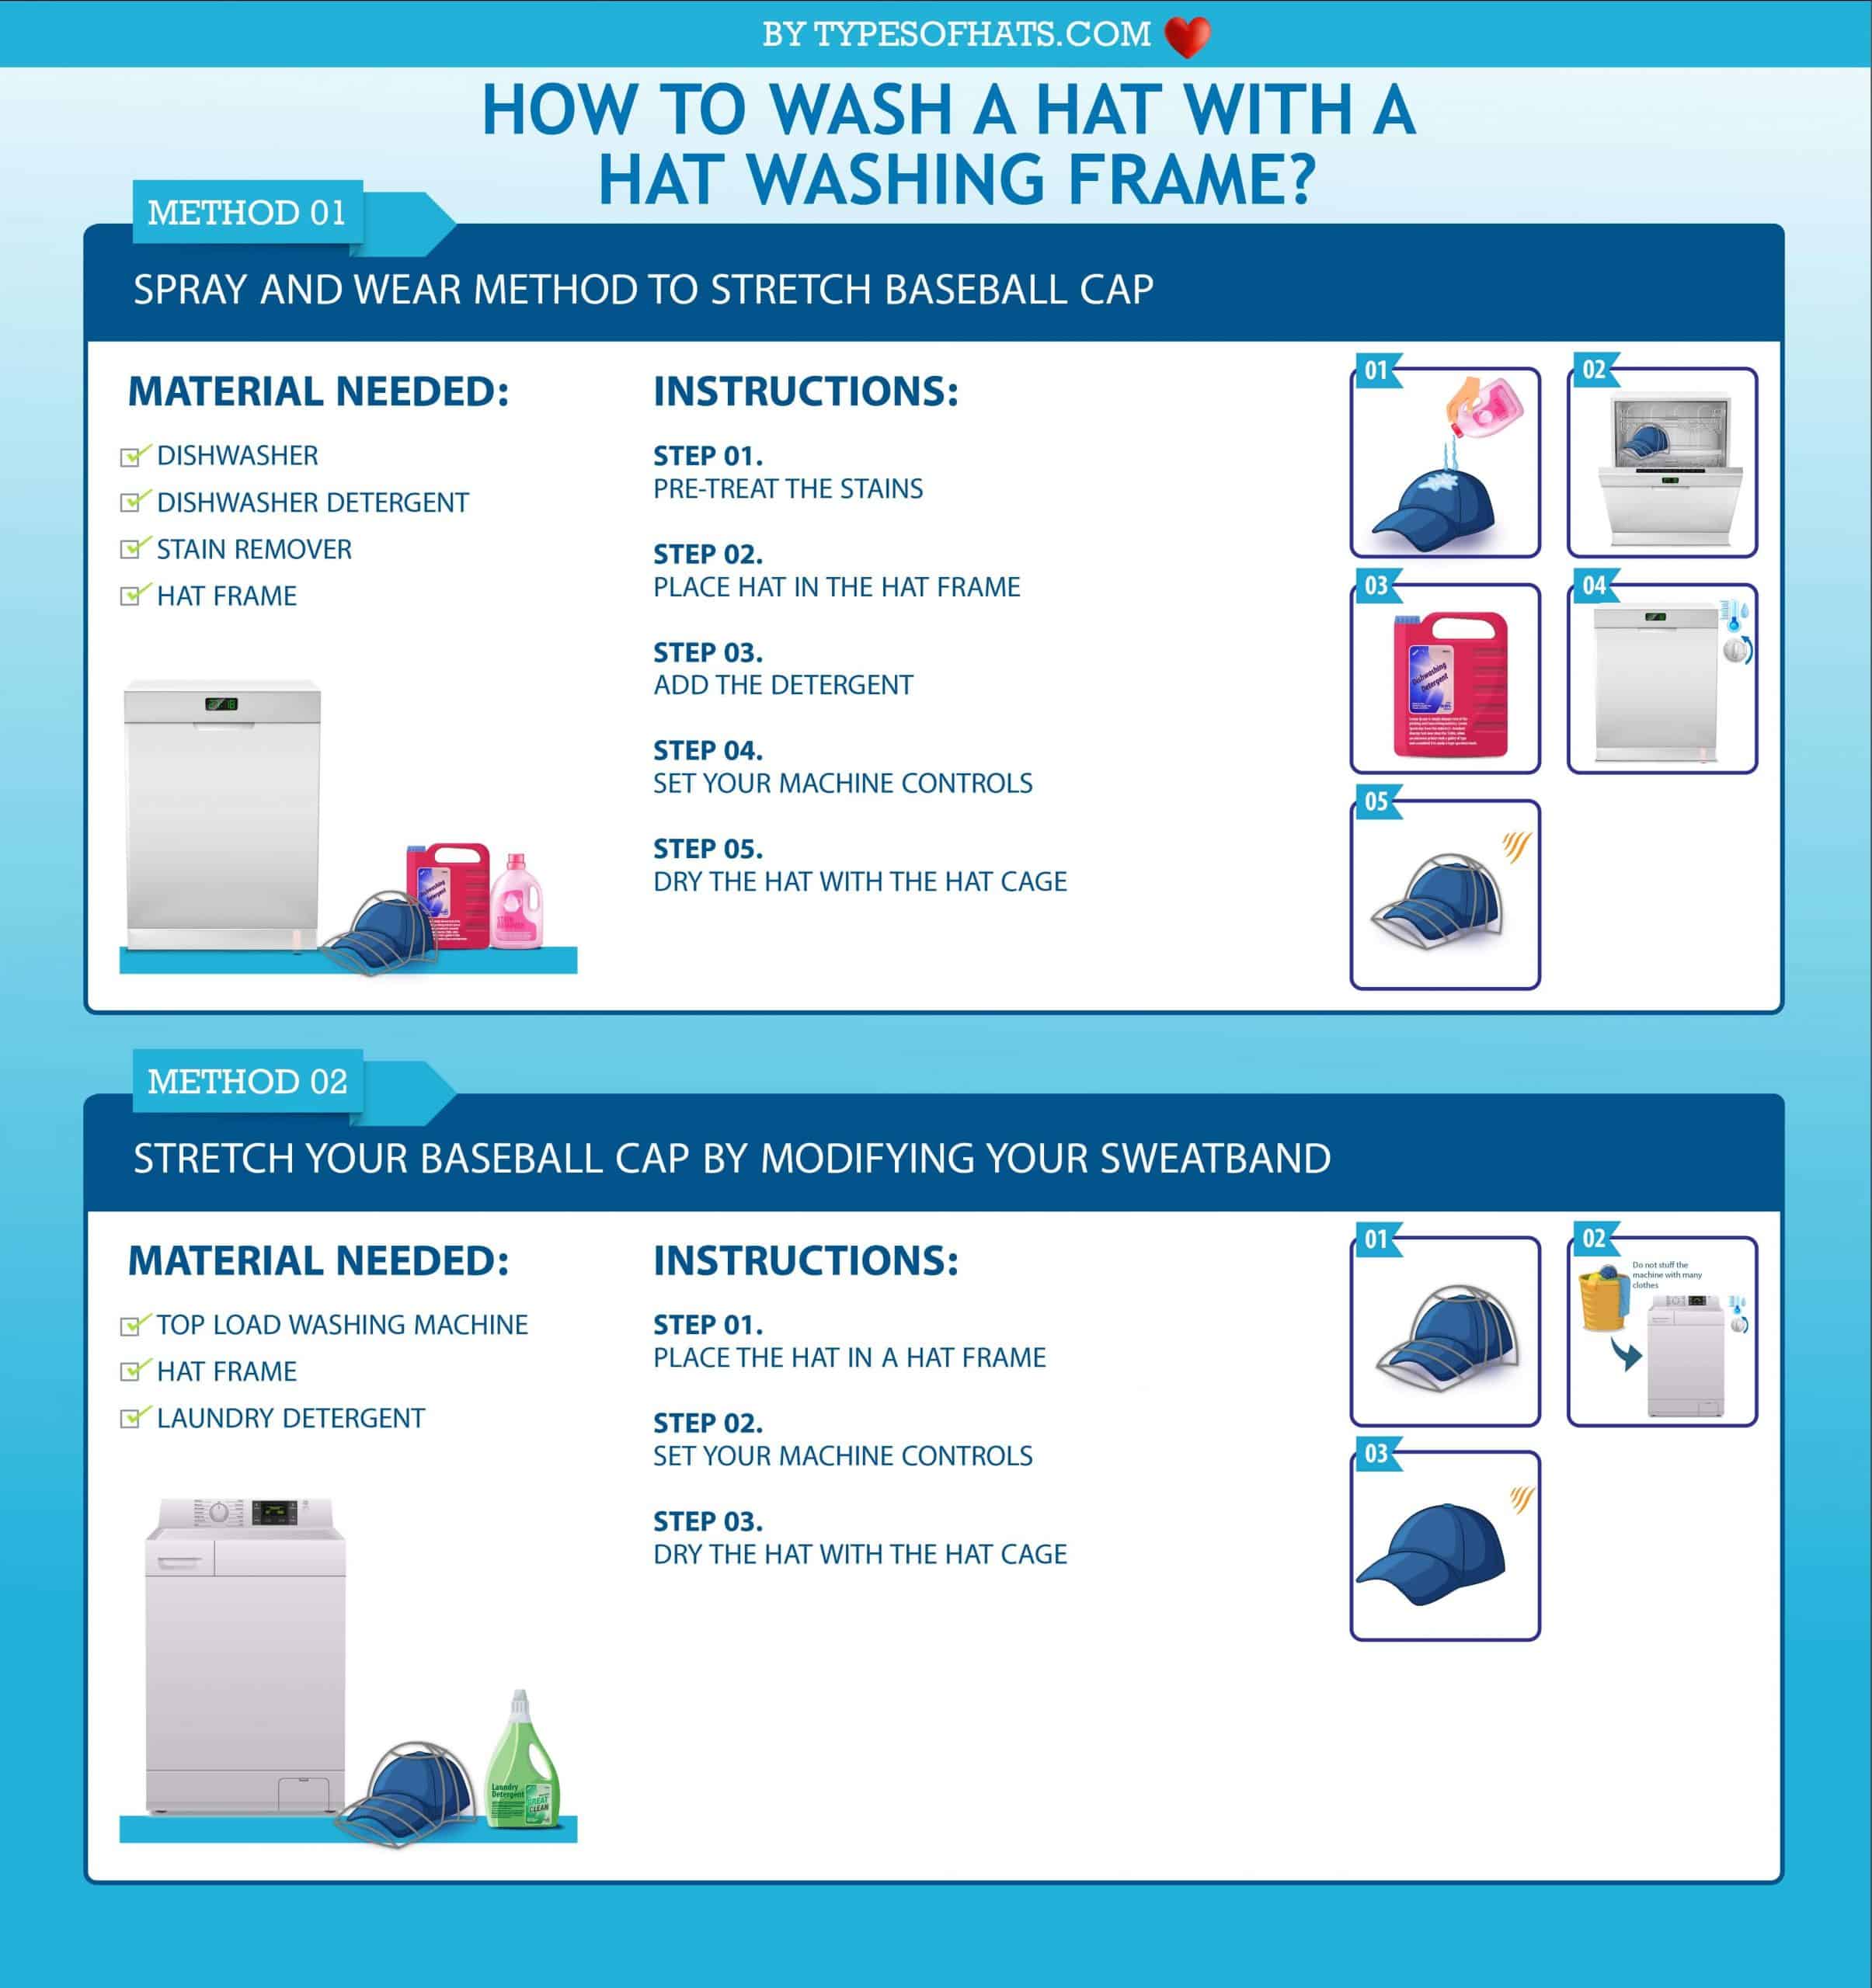 How to Wash a Hat with a Hat Washing Frame